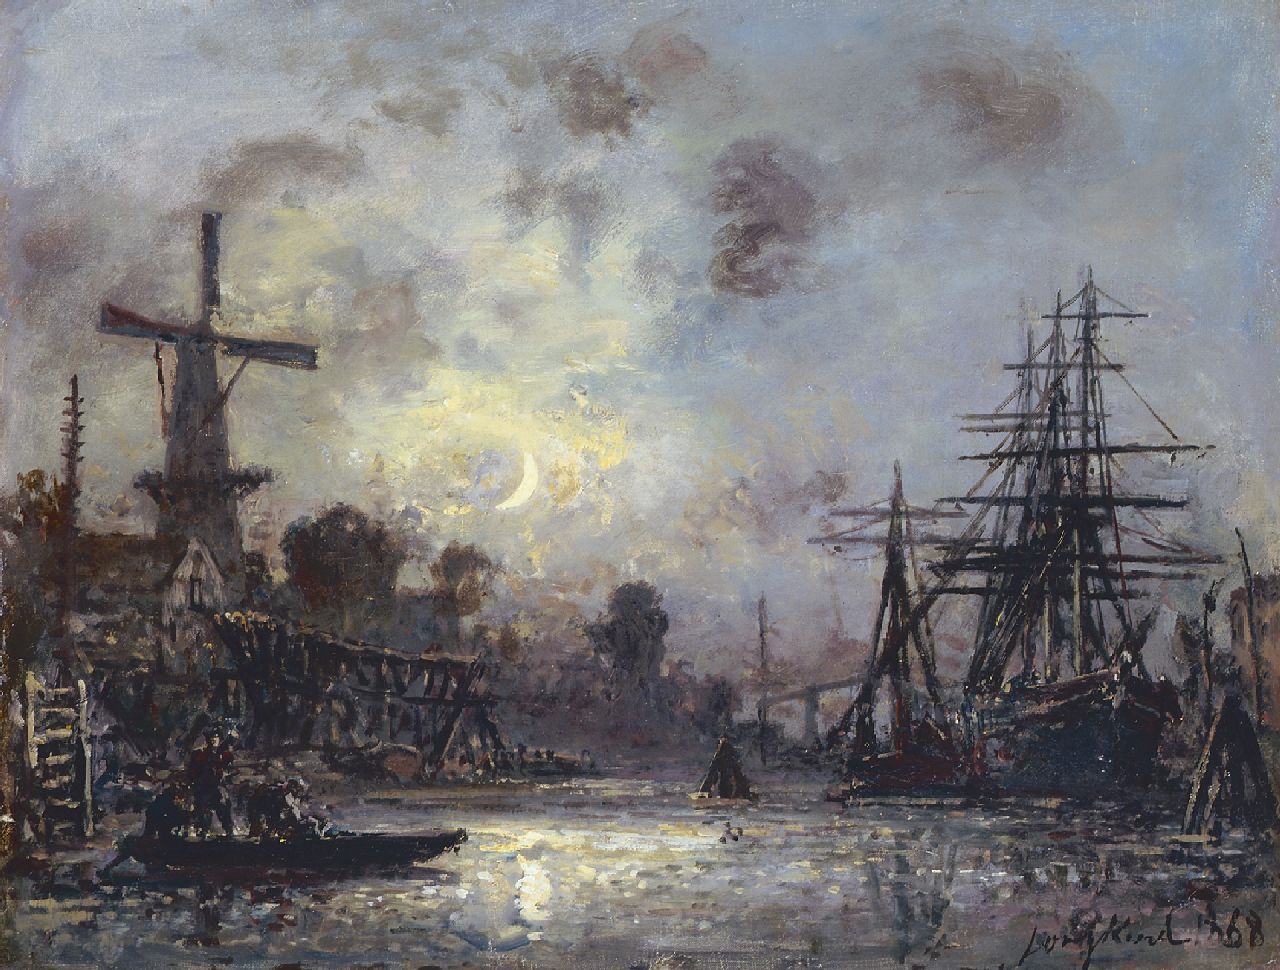 Jongkind J.B.  | Johan Barthold Jongkind, Clair de Lune, Old Delfshaven, oil on canvas laid down on panel 33.1 x 43.0 cm, signed l.r. and dated 1868